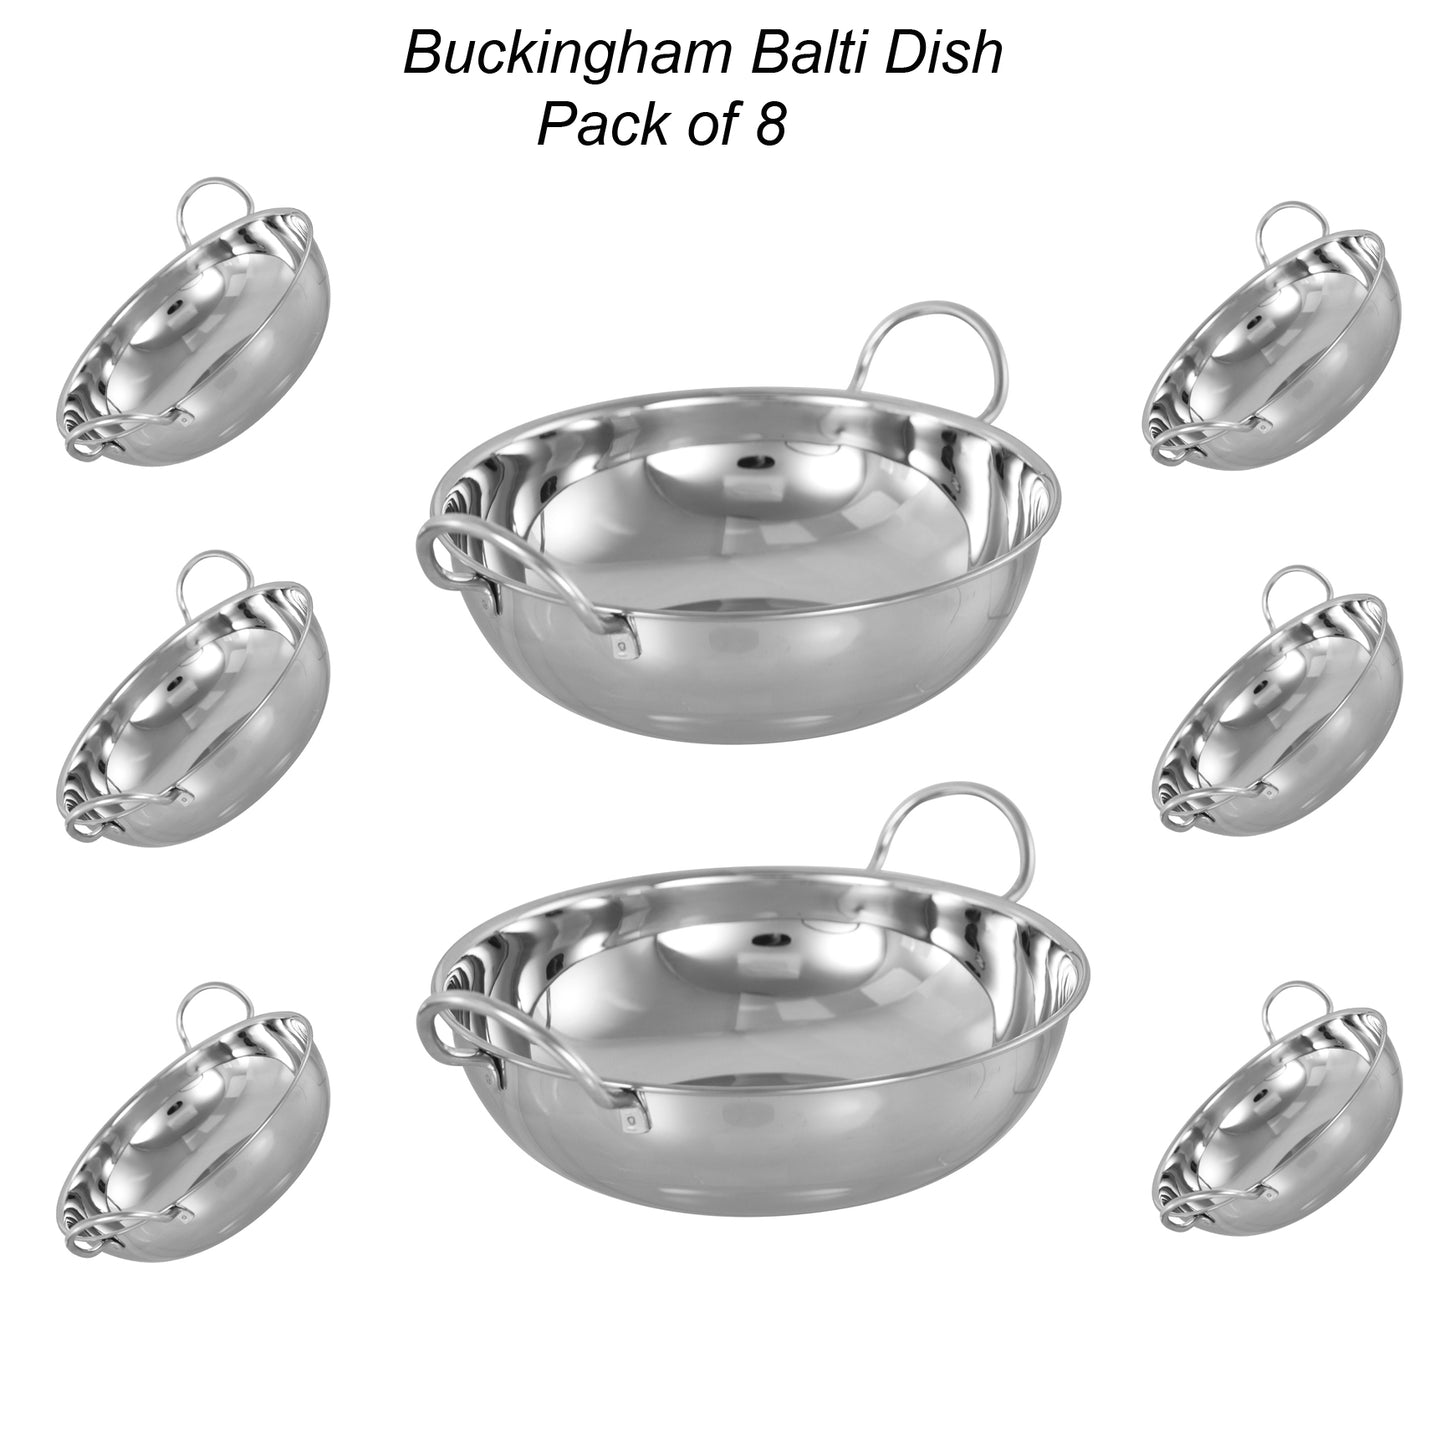 Buckingham Stainless Steel Balti Dish Indian Curry Food Serving Dish 17 cm, Pack of 8